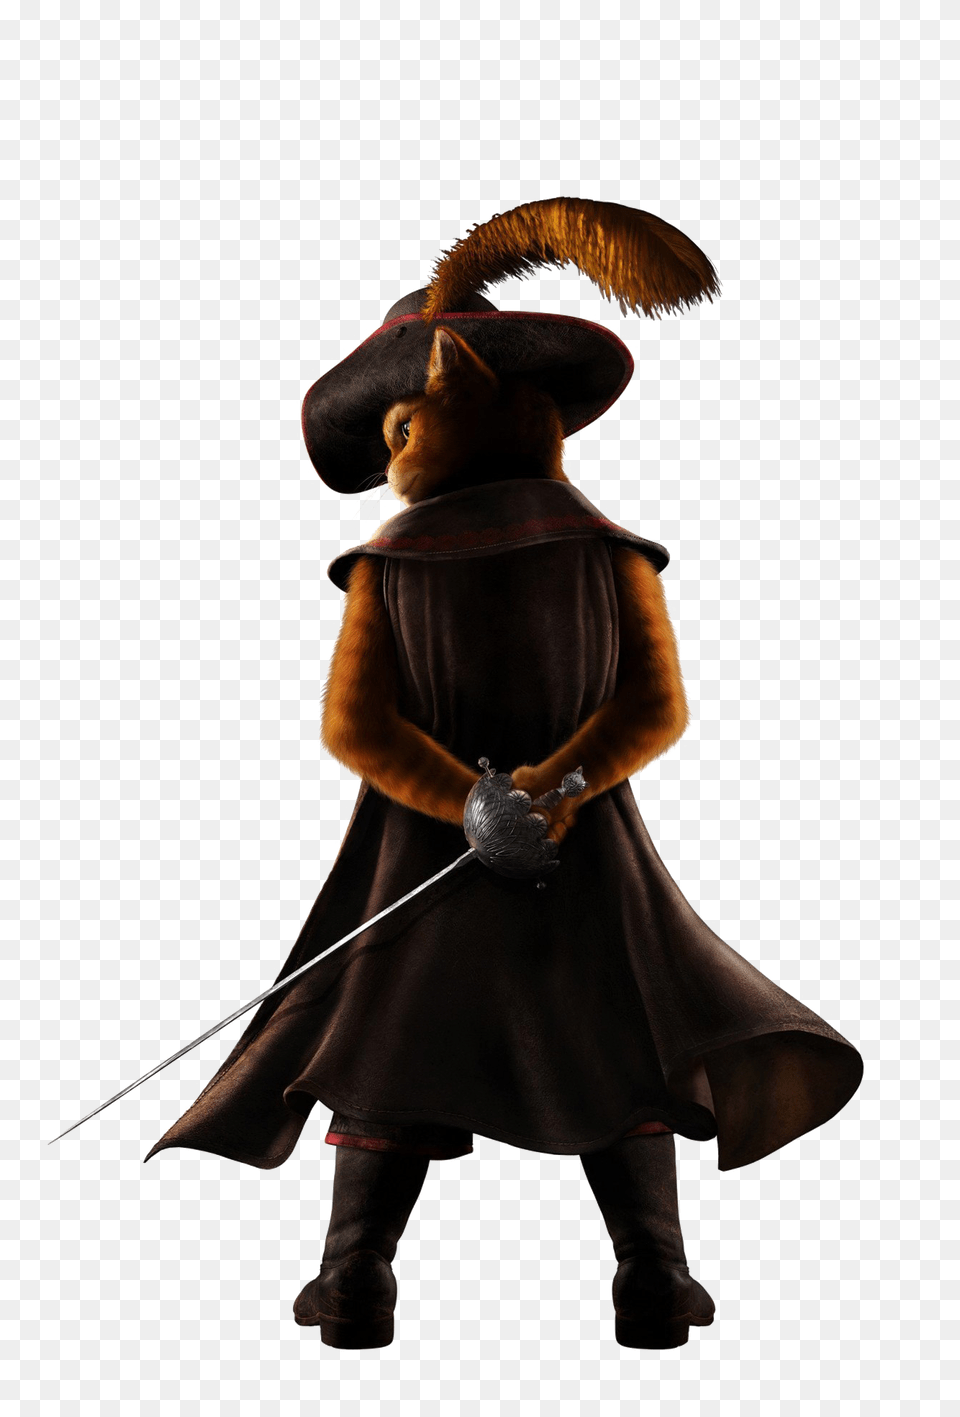 Puss In Boots Image File Puss In Boots Movie Poster, Sword, Weapon, Clothing, Costume Free Png